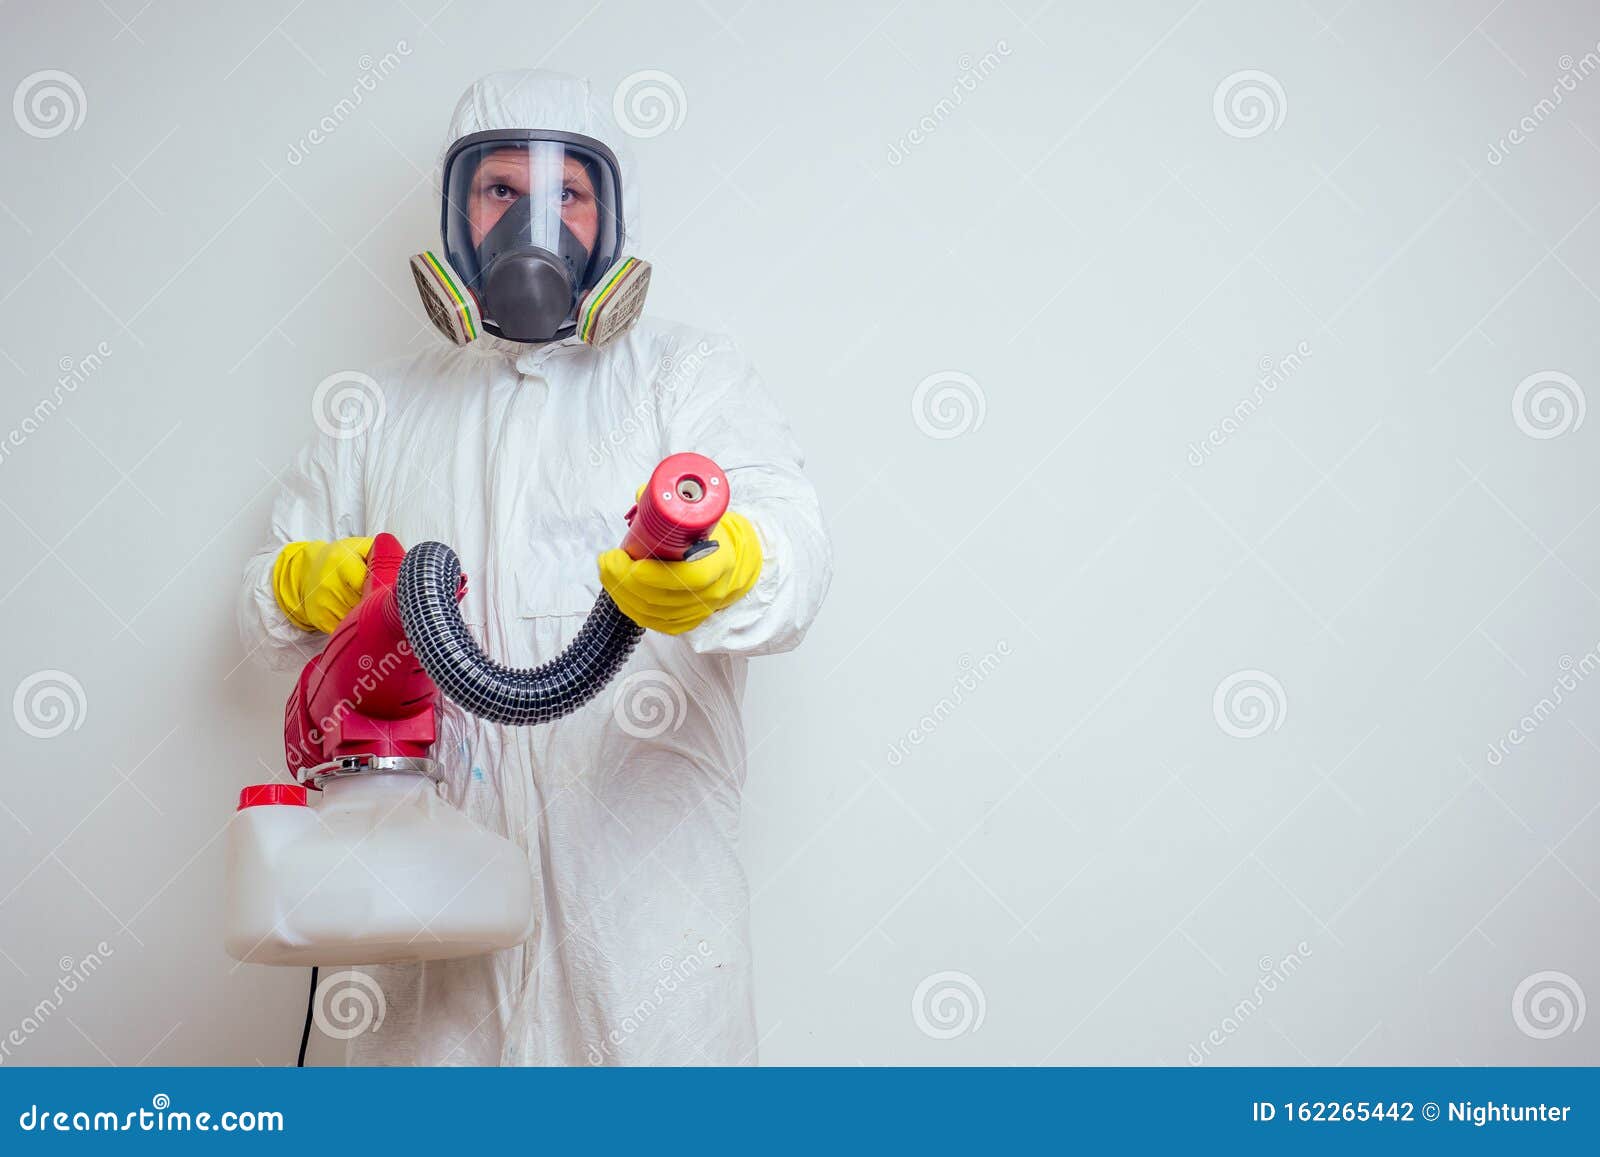 pest control worker spraying pesticides with sprayer in apartment copy spase white walls background